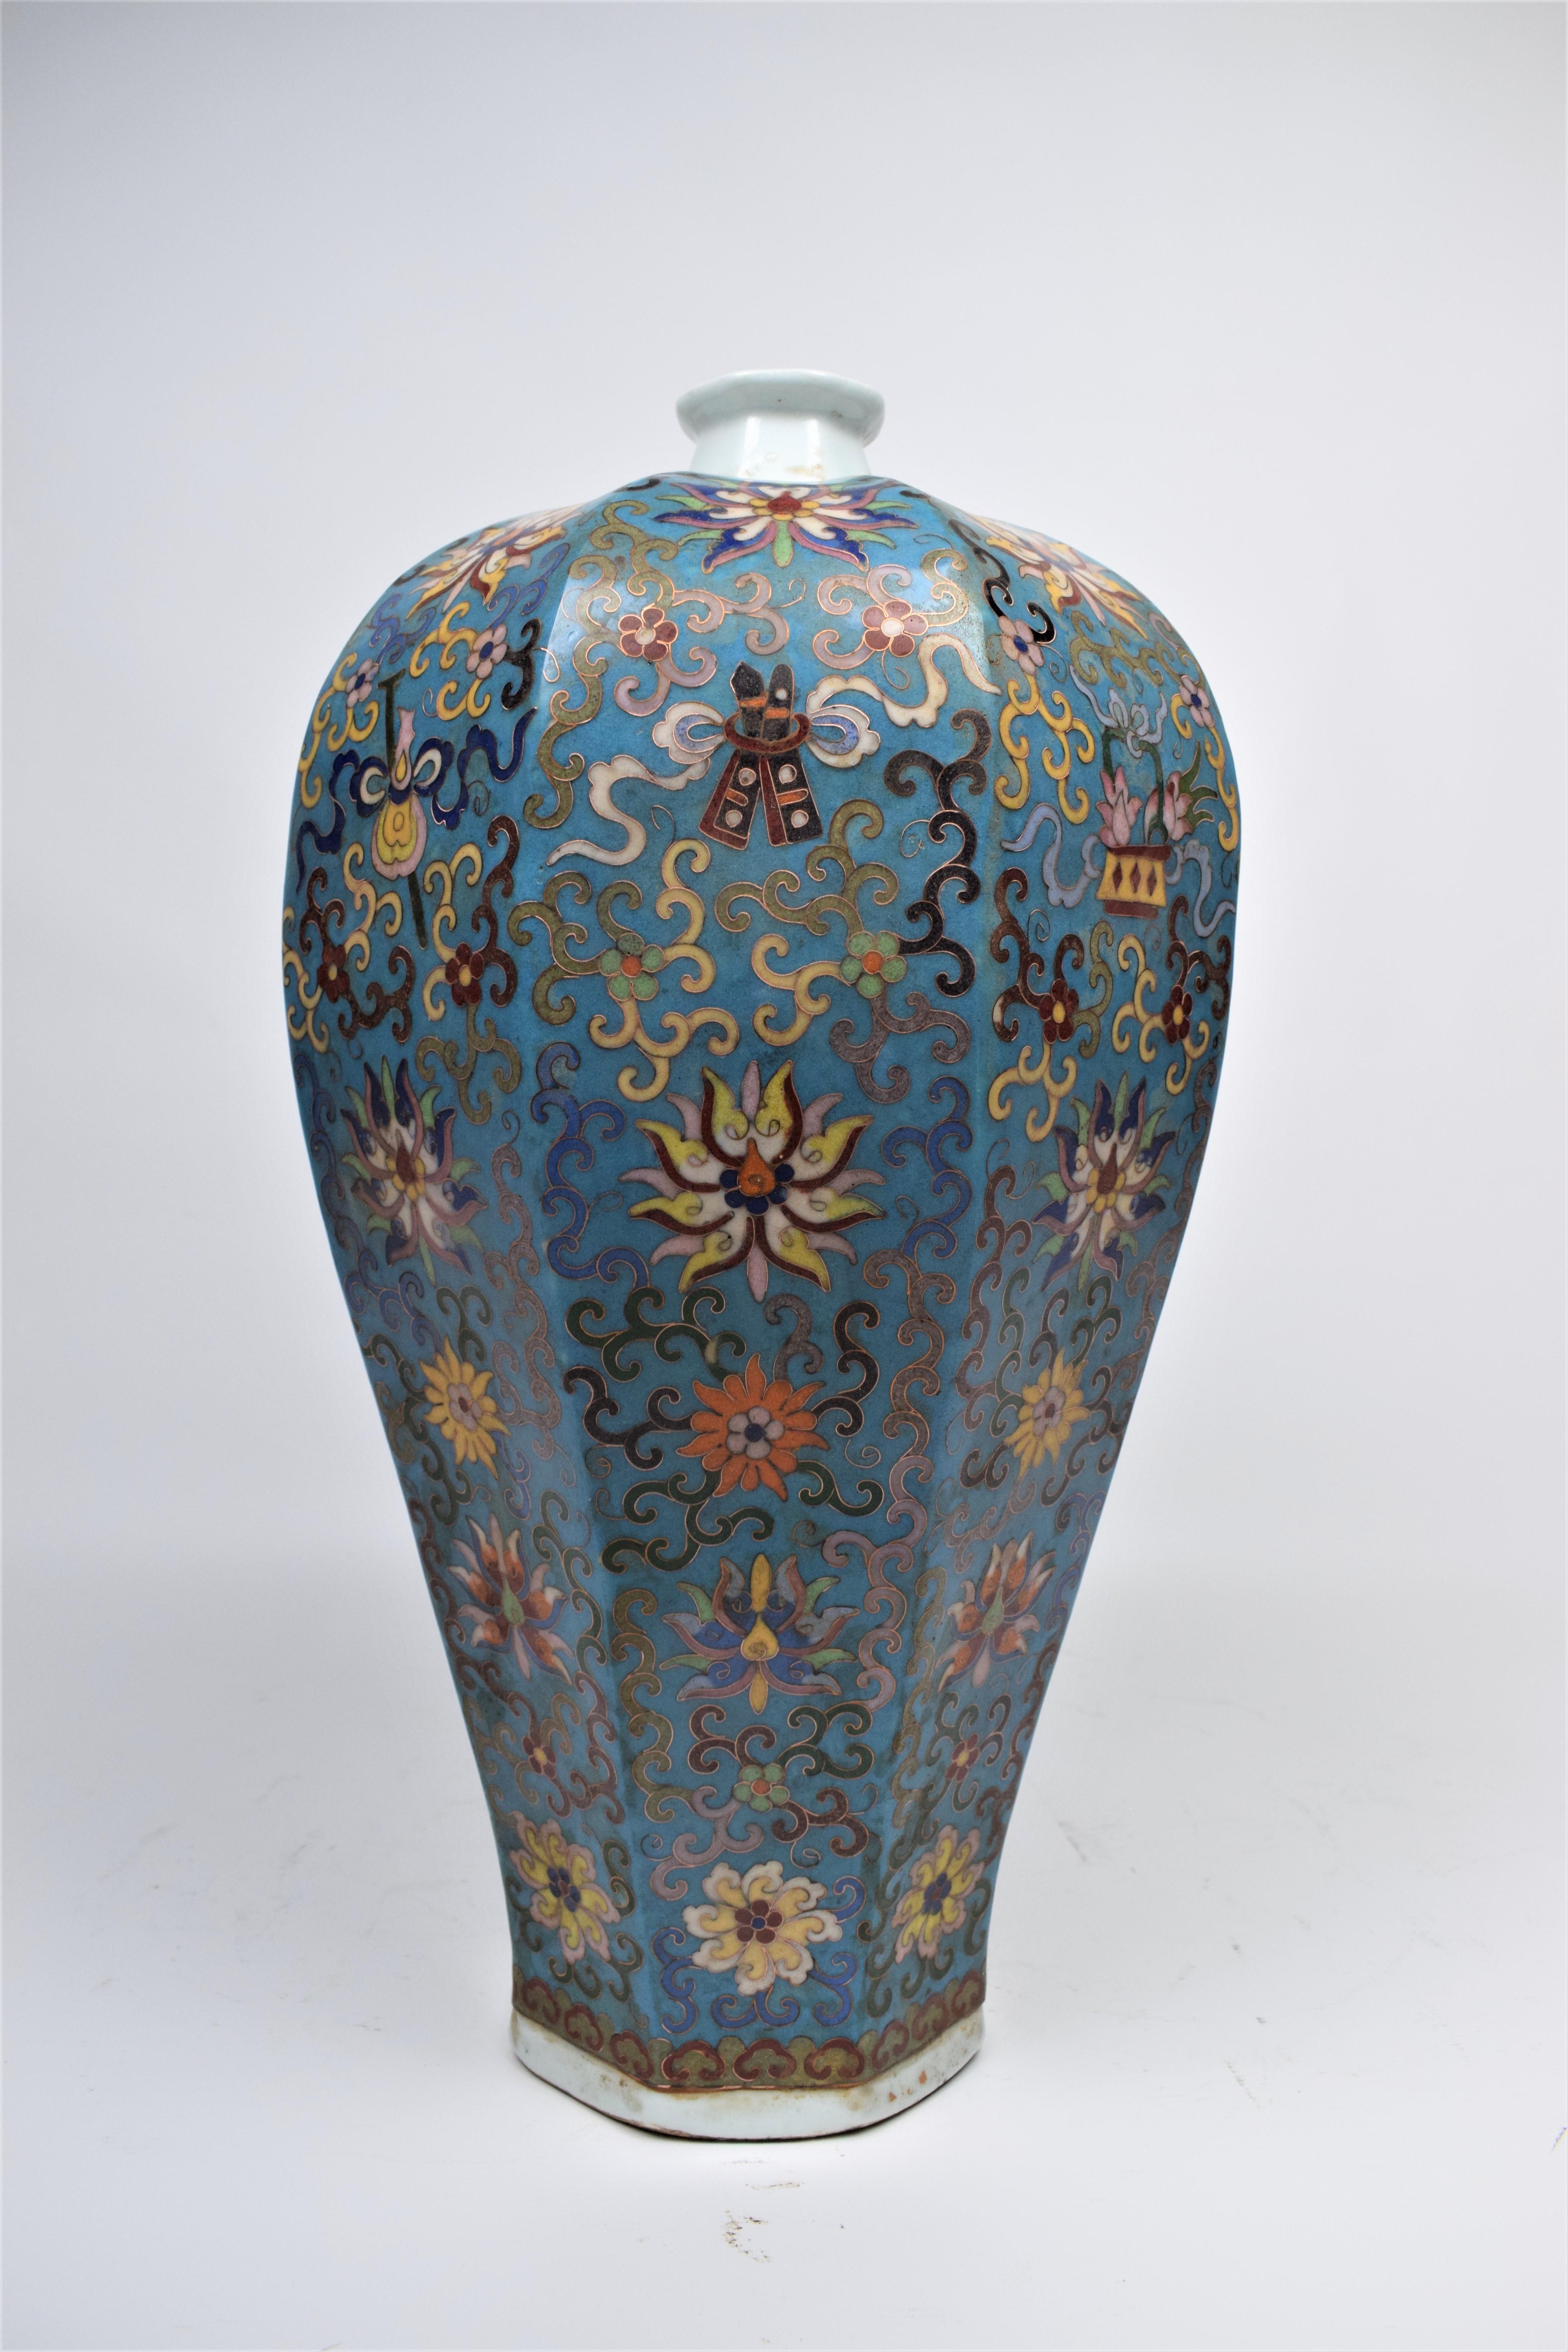 Chinese Large Cloisonné Enamel Bottle Vases Late Qing Dynasty, 19th Century For Sale 1